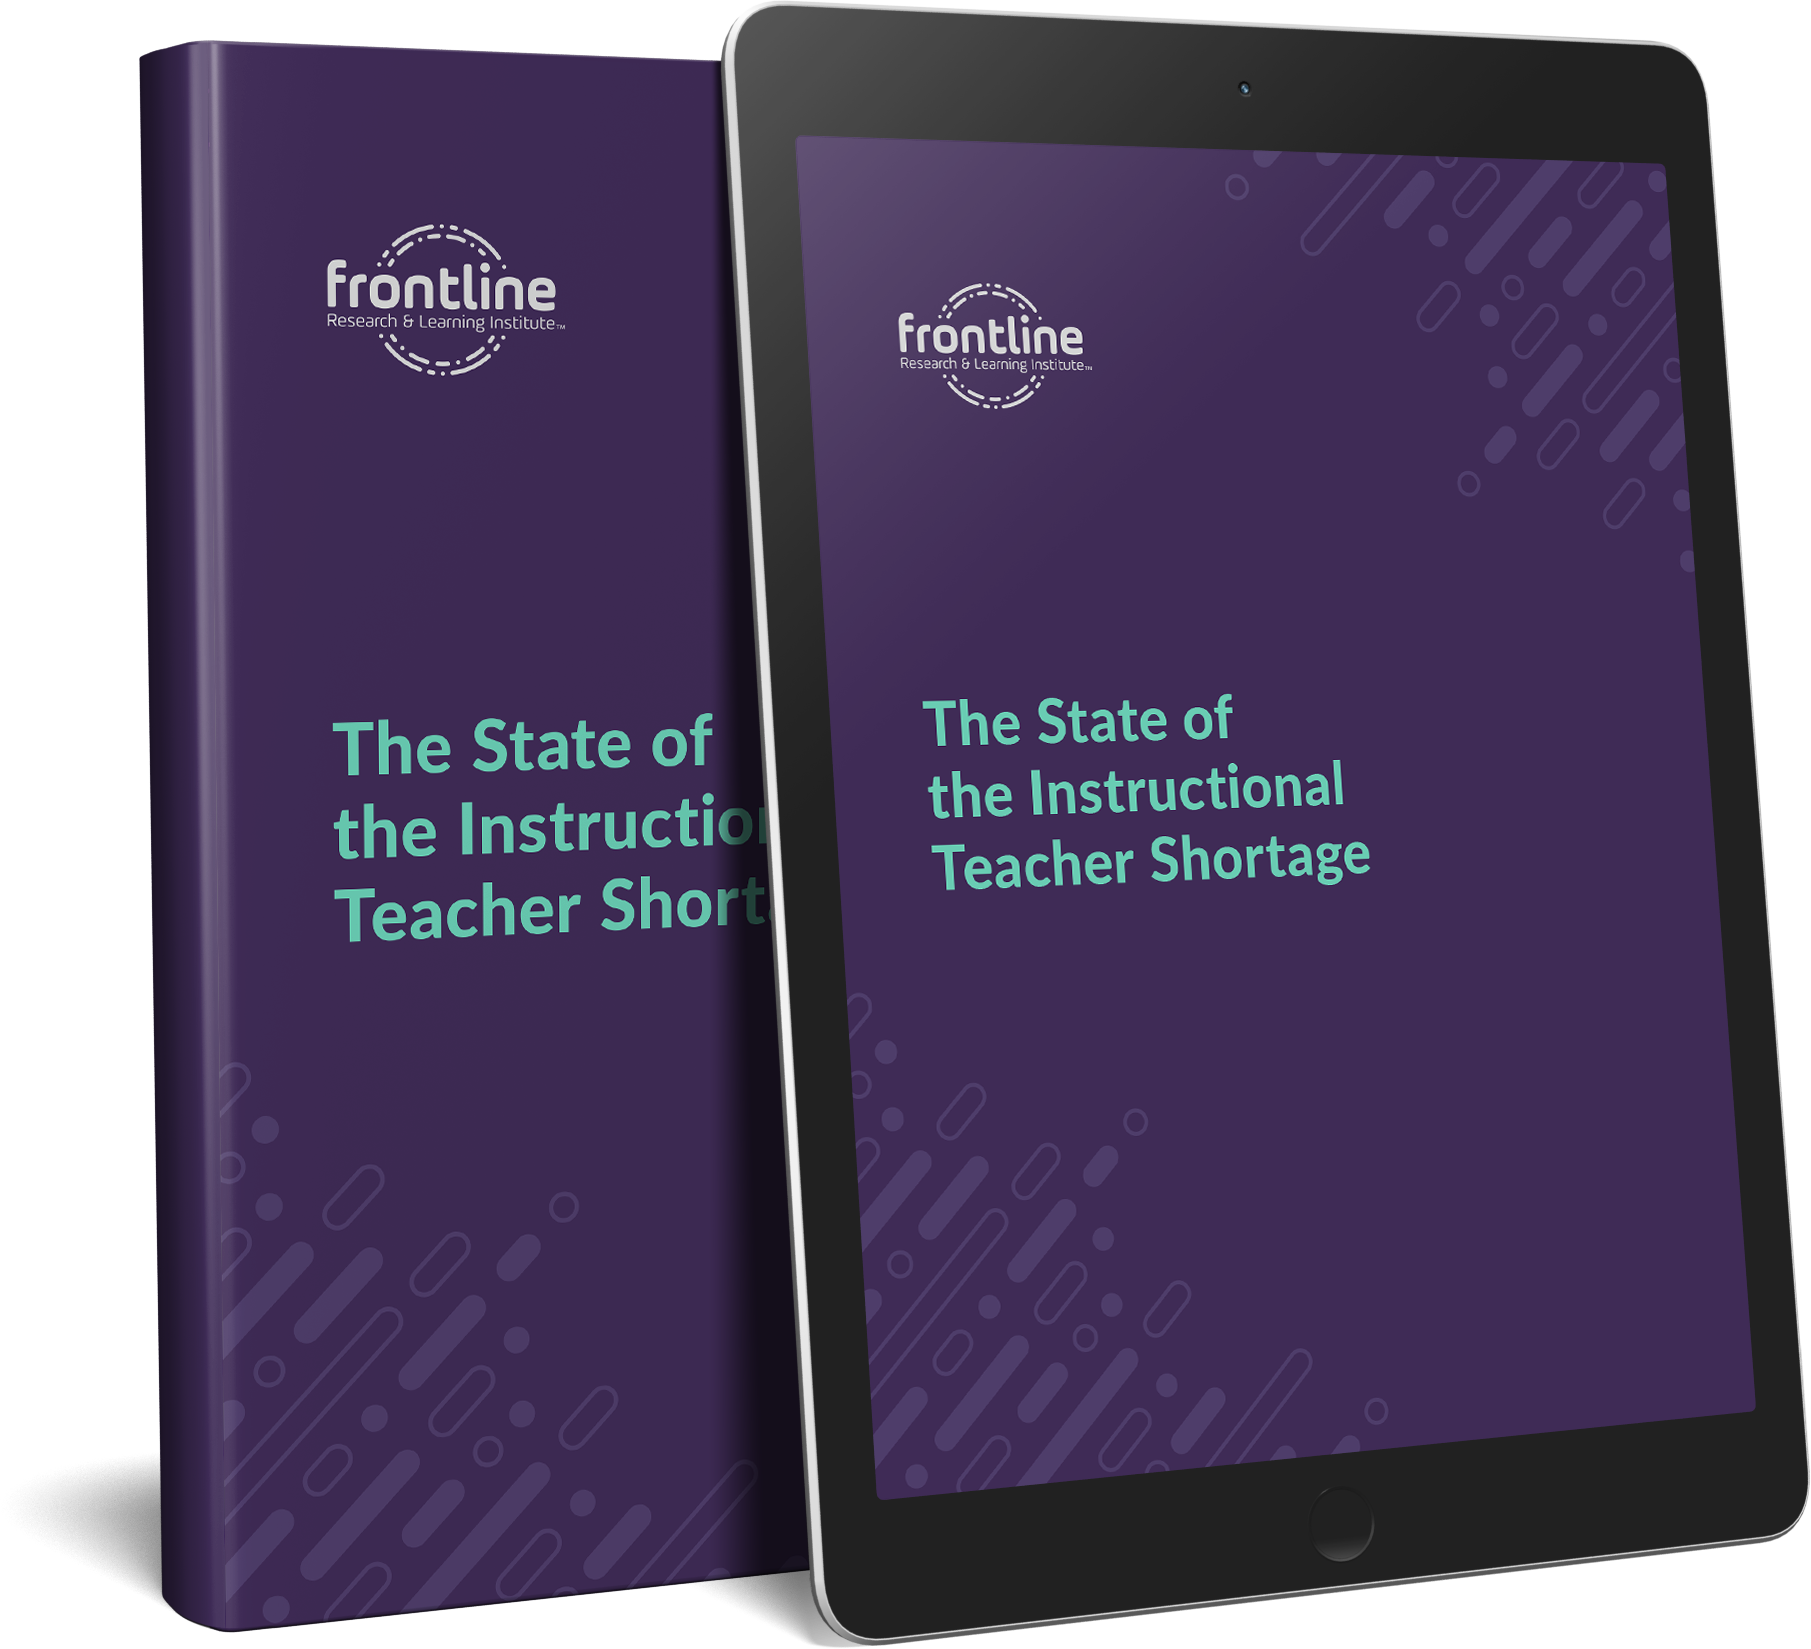 The State of the Instructional Teacher Shortage eBook Mockup